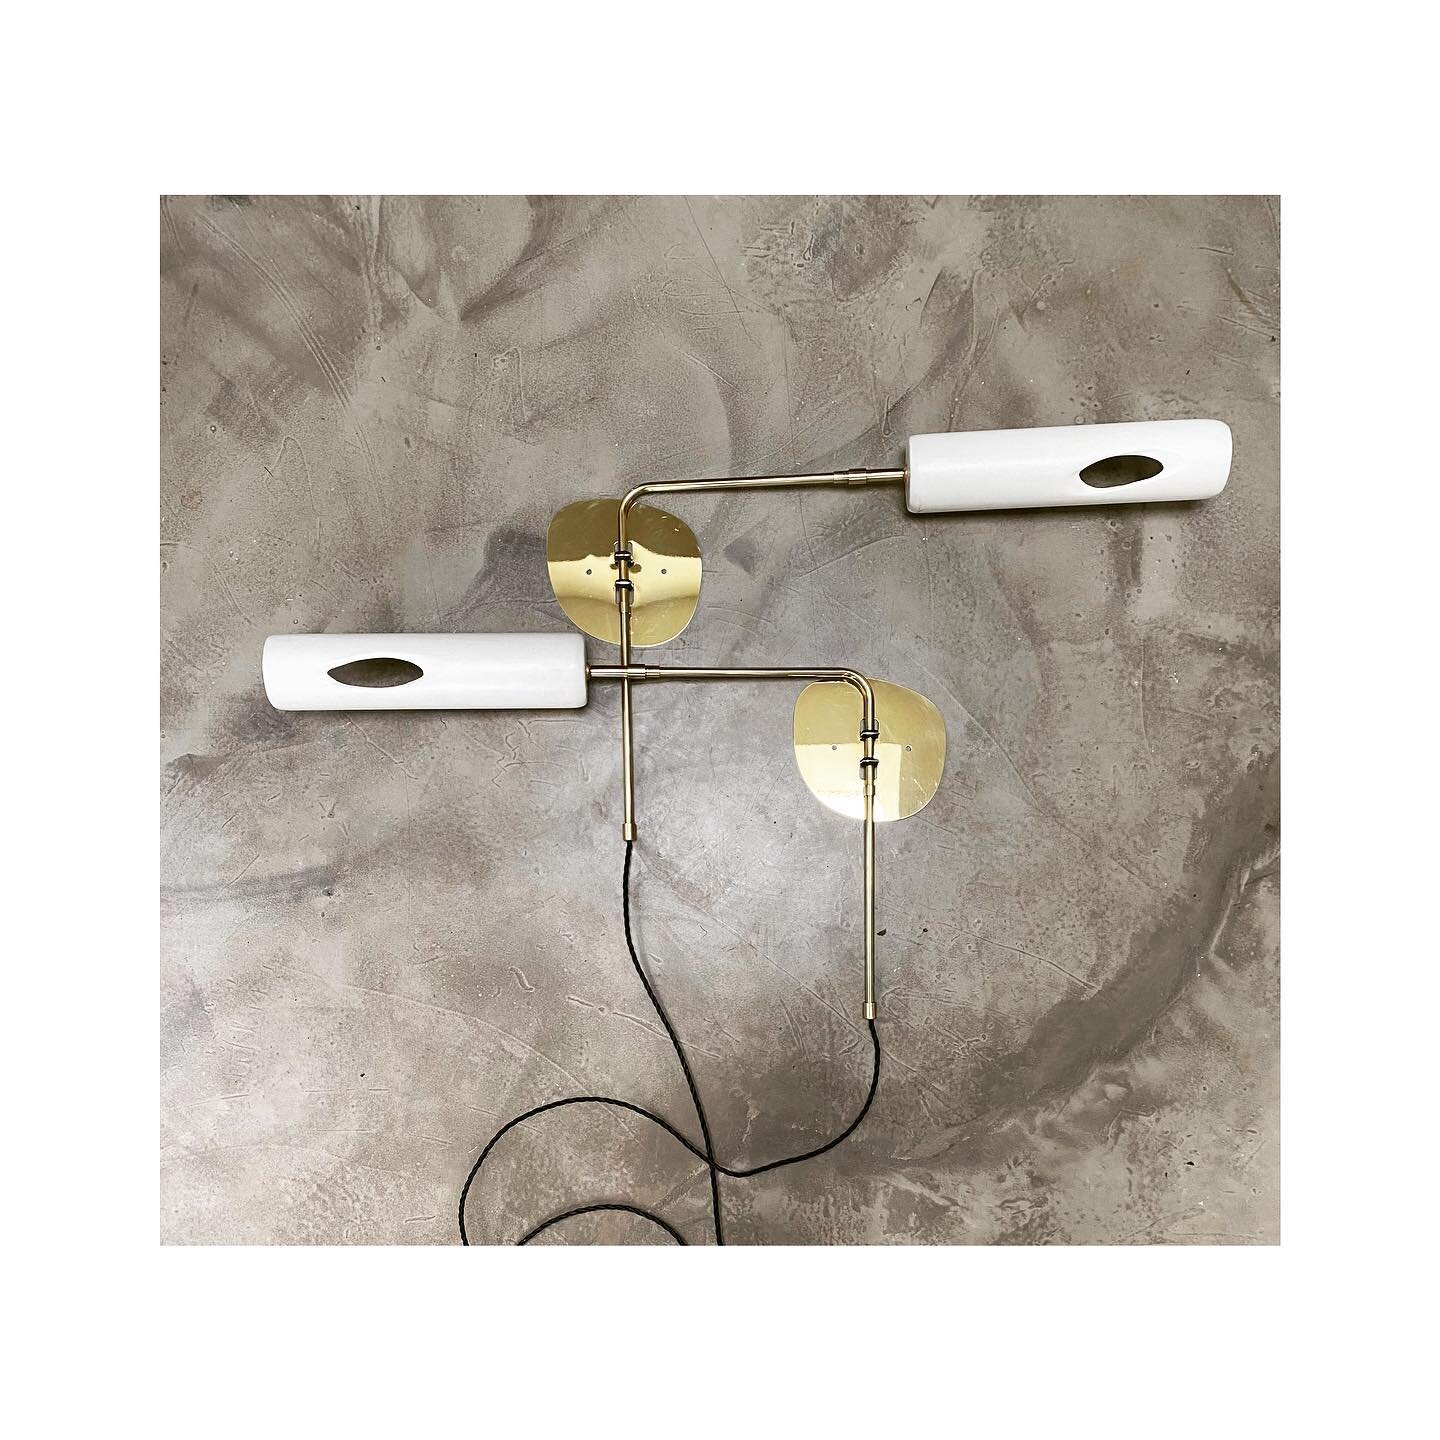 Chalk walllights x 2.
These pivot from their brass wall bracket.
The carved wooden shade has a gesso and wax finish, this is on a swivel joint- directional, sculptural, functional lighting.
🙌😉
Two more lights leaving the workshop today.
#light
#lig